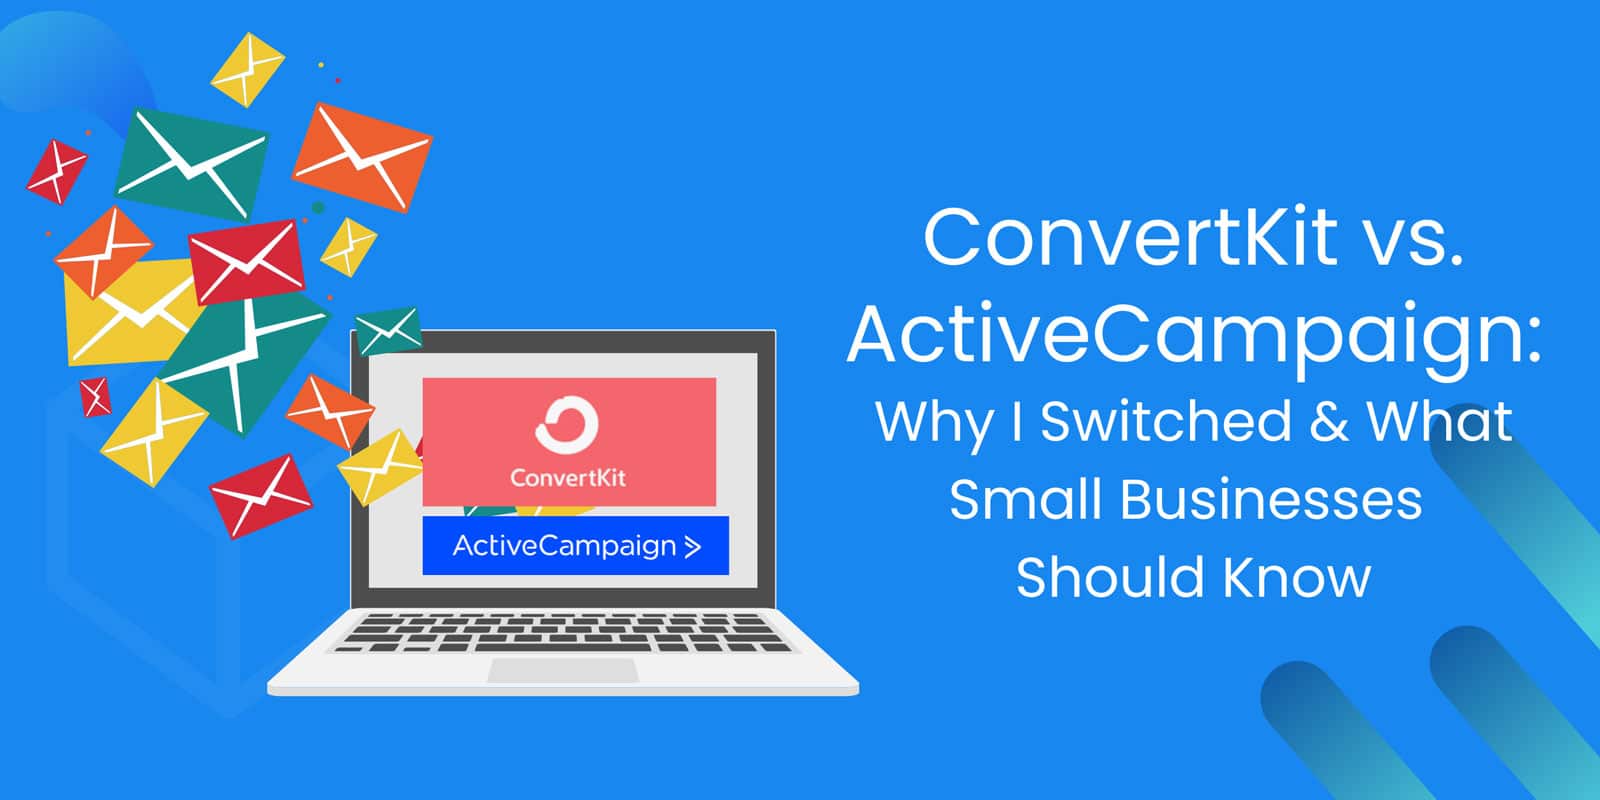 ConvertKit vs. ActiveCampaign: Why I Switched & What Small Businesses Should Know